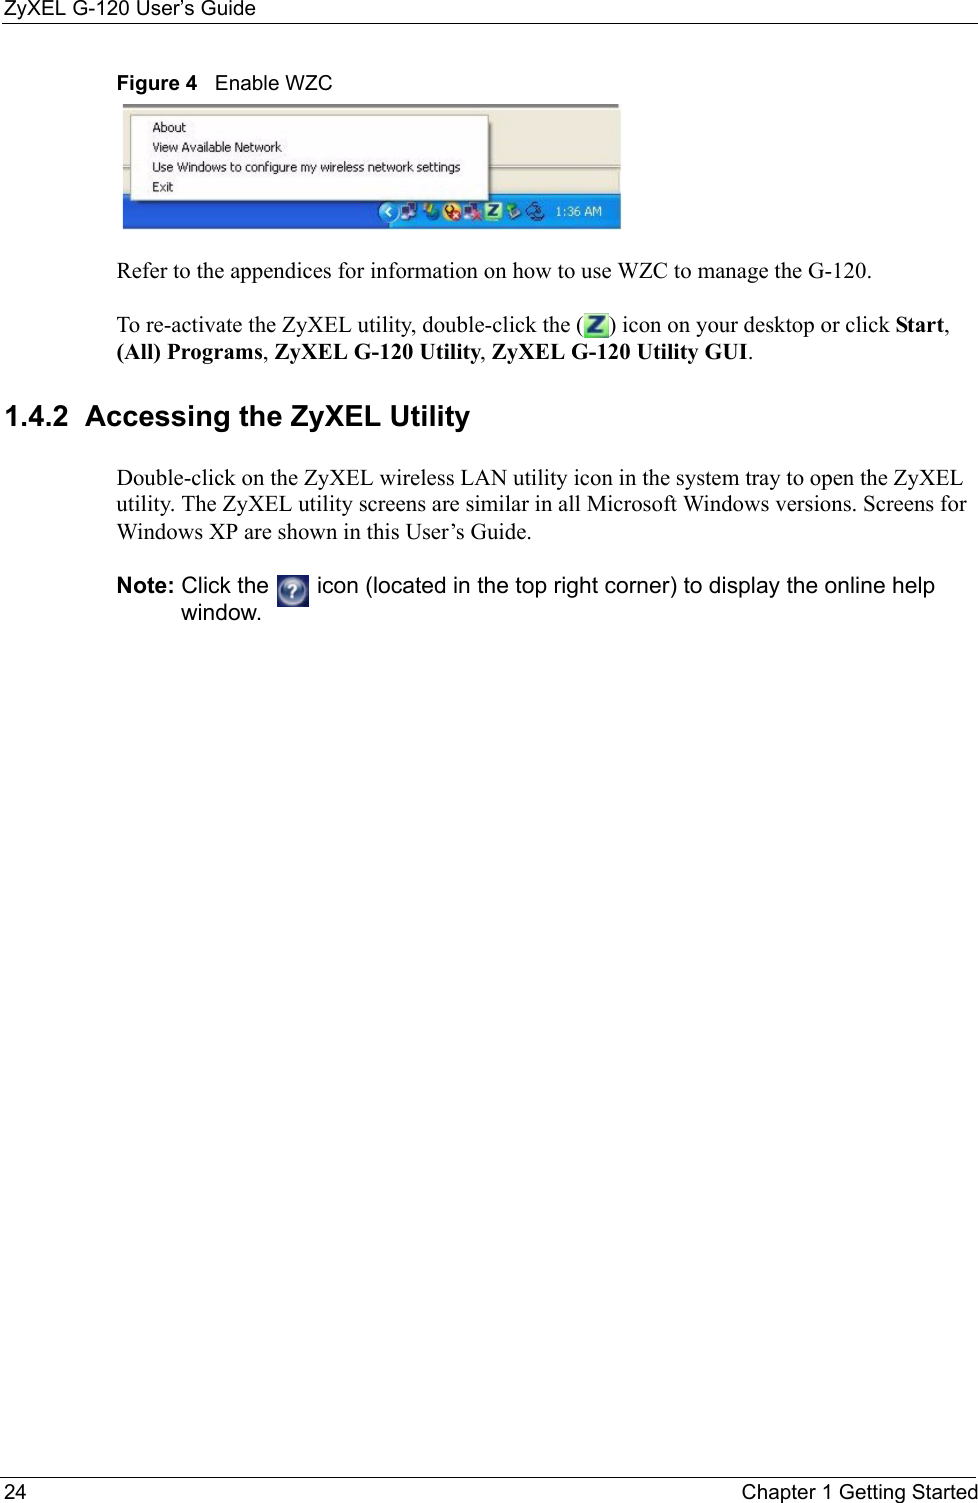 ZyXEL G-120 User’s Guide24 Chapter 1 Getting StartedFigure 4   Enable WZCRefer to the appendices for information on how to use WZC to manage the G-120.To re-activate the ZyXEL utility, double-click the ( ) icon on your desktop or click Start, (All) Programs, ZyXEL G-120 Utility, ZyXEL G-120 Utility GUI.1.4.2  Accessing the ZyXEL Utility Double-click on the ZyXEL wireless LAN utility icon in the system tray to open the ZyXEL utility. The ZyXEL utility screens are similar in all Microsoft Windows versions. Screens for Windows XP are shown in this User’s Guide. Note: Click the   icon (located in the top right corner) to display the online help window.